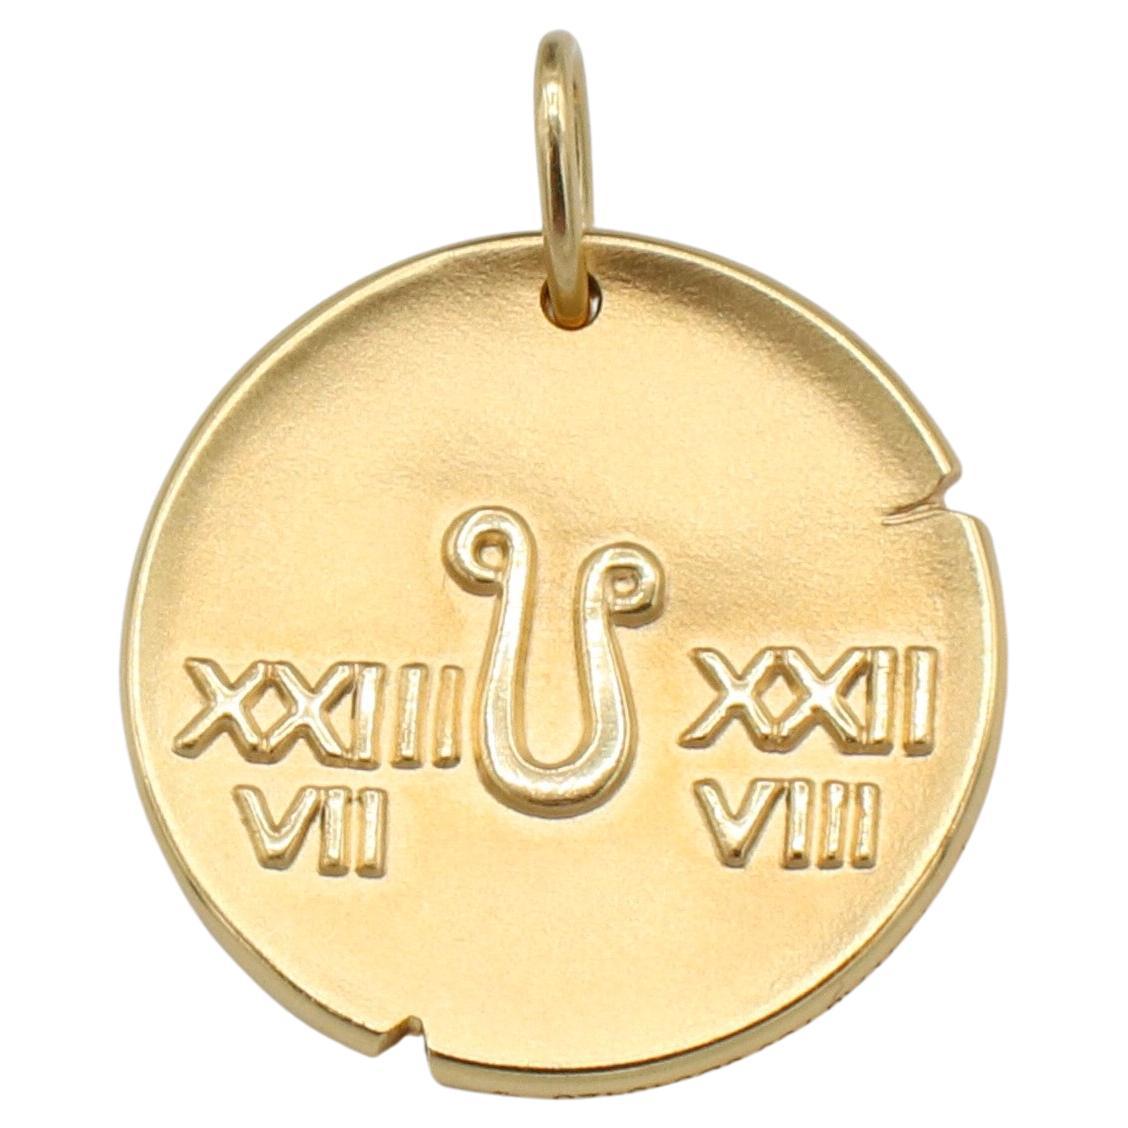 Van Cleef & Arpels VCA Zodiac Medal Leo 18 Karat Yellow Gold Pendant Medallion 
Metal: 18k yellow gold
Weight: 8.21 grams
Diameter: 21mm
Zodiac sign: Leo July 23 - August 22
Bale size: 5mm
Note: Pendant only (does not include chain) 
Retail: $2,430